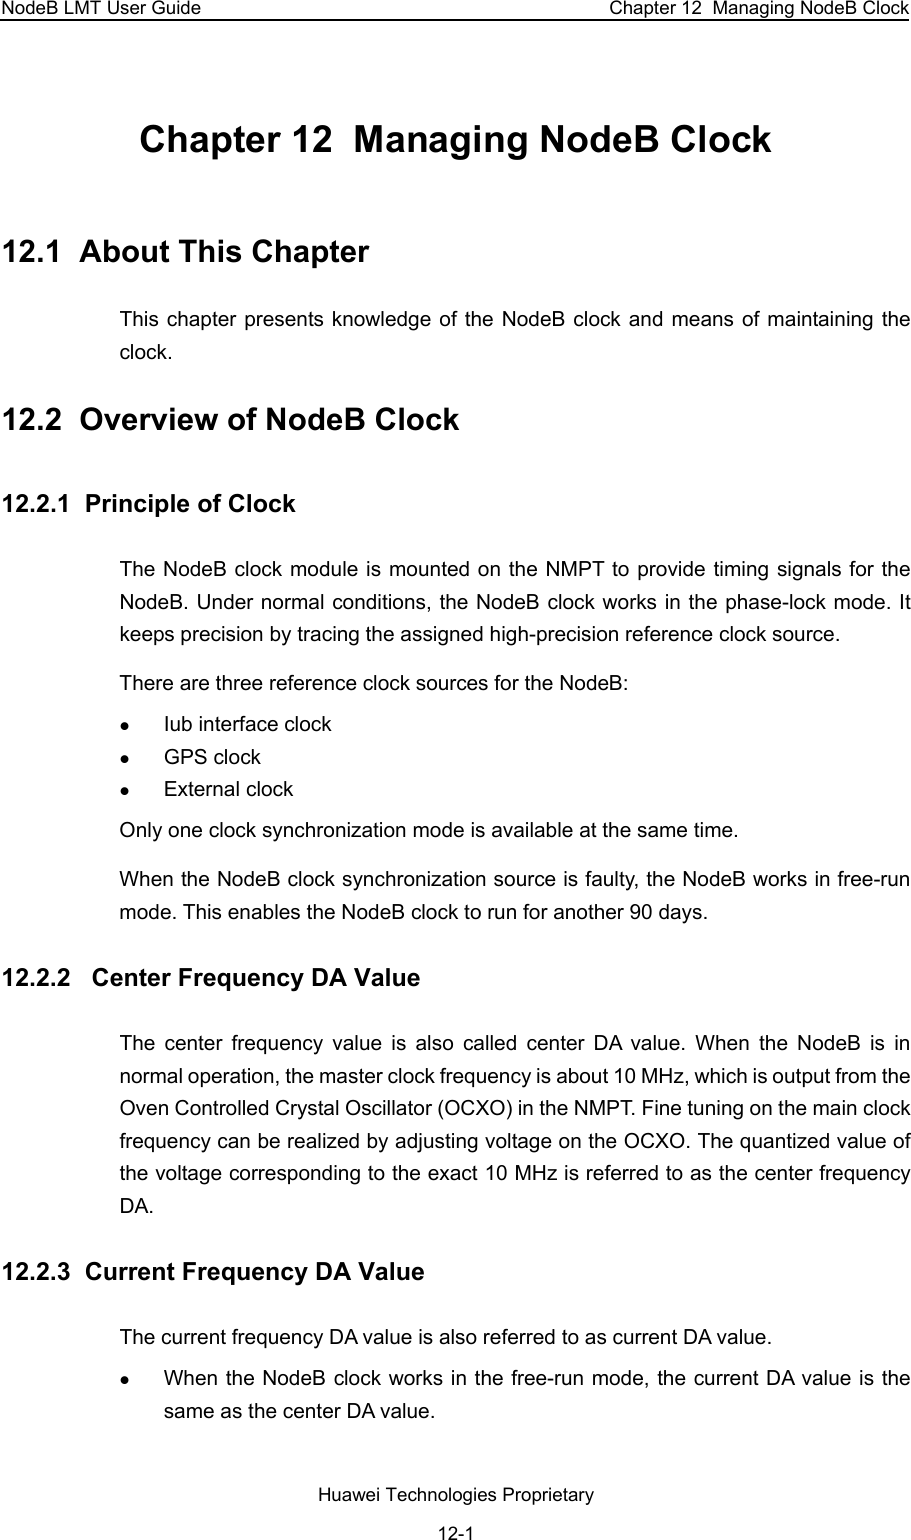 NodeB LMT User Guide  Chapter 12  Managing NodeB Clock Chapter 12  Managing NodeB Clock 12.1  About This Chapter This chapter presents knowledge of the NodeB clock and means of maintaining the clock.  12.2  Overview of NodeB Clock 12.2.1  Principle of Clock The NodeB clock module is mounted on the NMPT to provide timing signals for the NodeB. Under normal conditions, the NodeB clock works in the phase-lock mode. It keeps precision by tracing the assigned high-precision reference clock source.  There are three reference clock sources for the NodeB:  z Iub interface clock z GPS clock  z External clock Only one clock synchronization mode is available at the same time.  When the NodeB clock synchronization source is faulty, the NodeB works in free-run mode. This enables the NodeB clock to run for another 90 days.  12.2.2   Center Frequency DA Value The center frequency value is also called center DA value. When the NodeB is in normal operation, the master clock frequency is about 10 MHz, which is output from the Oven Controlled Crystal Oscillator (OCXO) in the NMPT. Fine tuning on the main clock frequency can be realized by adjusting voltage on the OCXO. The quantized value of the voltage corresponding to the exact 10 MHz is referred to as the center frequency DA.  12.2.3  Current Frequency DA Value The current frequency DA value is also referred to as current DA value.  z When the NodeB clock works in the free-run mode, the current DA value is the same as the center DA value.  Huawei Technologies Proprietary 12-1 